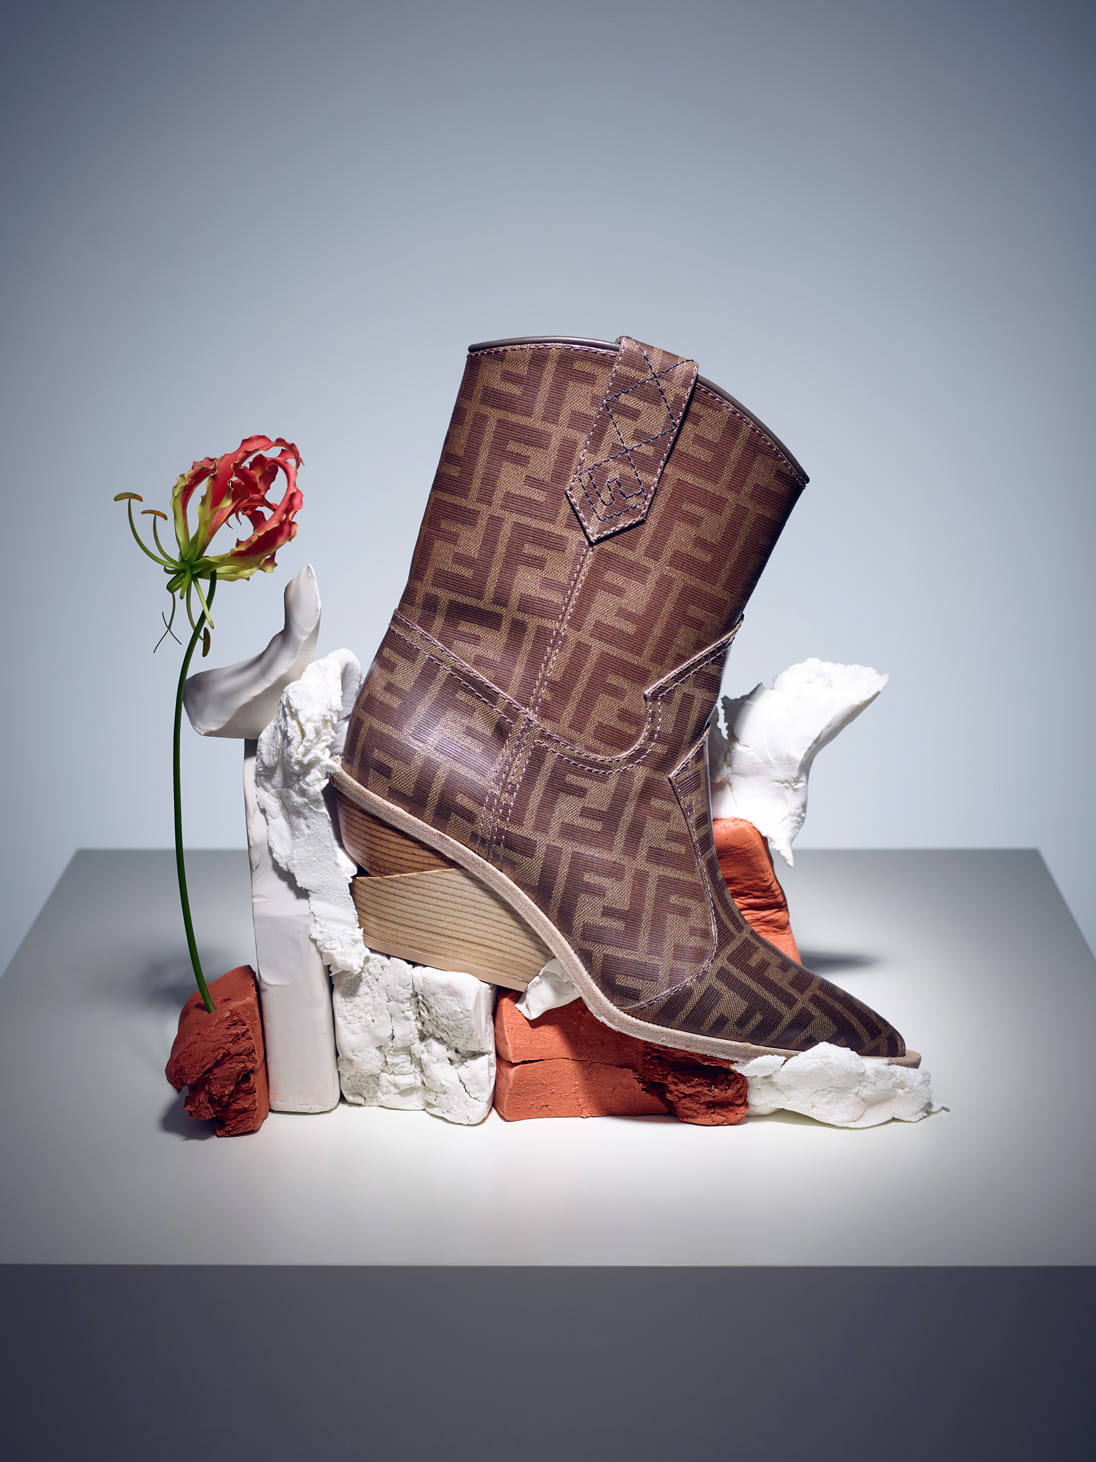 Today the cowboy boot represents adventure, and that mood is neatly summed up in Fendi’s glazed logo-motif pair